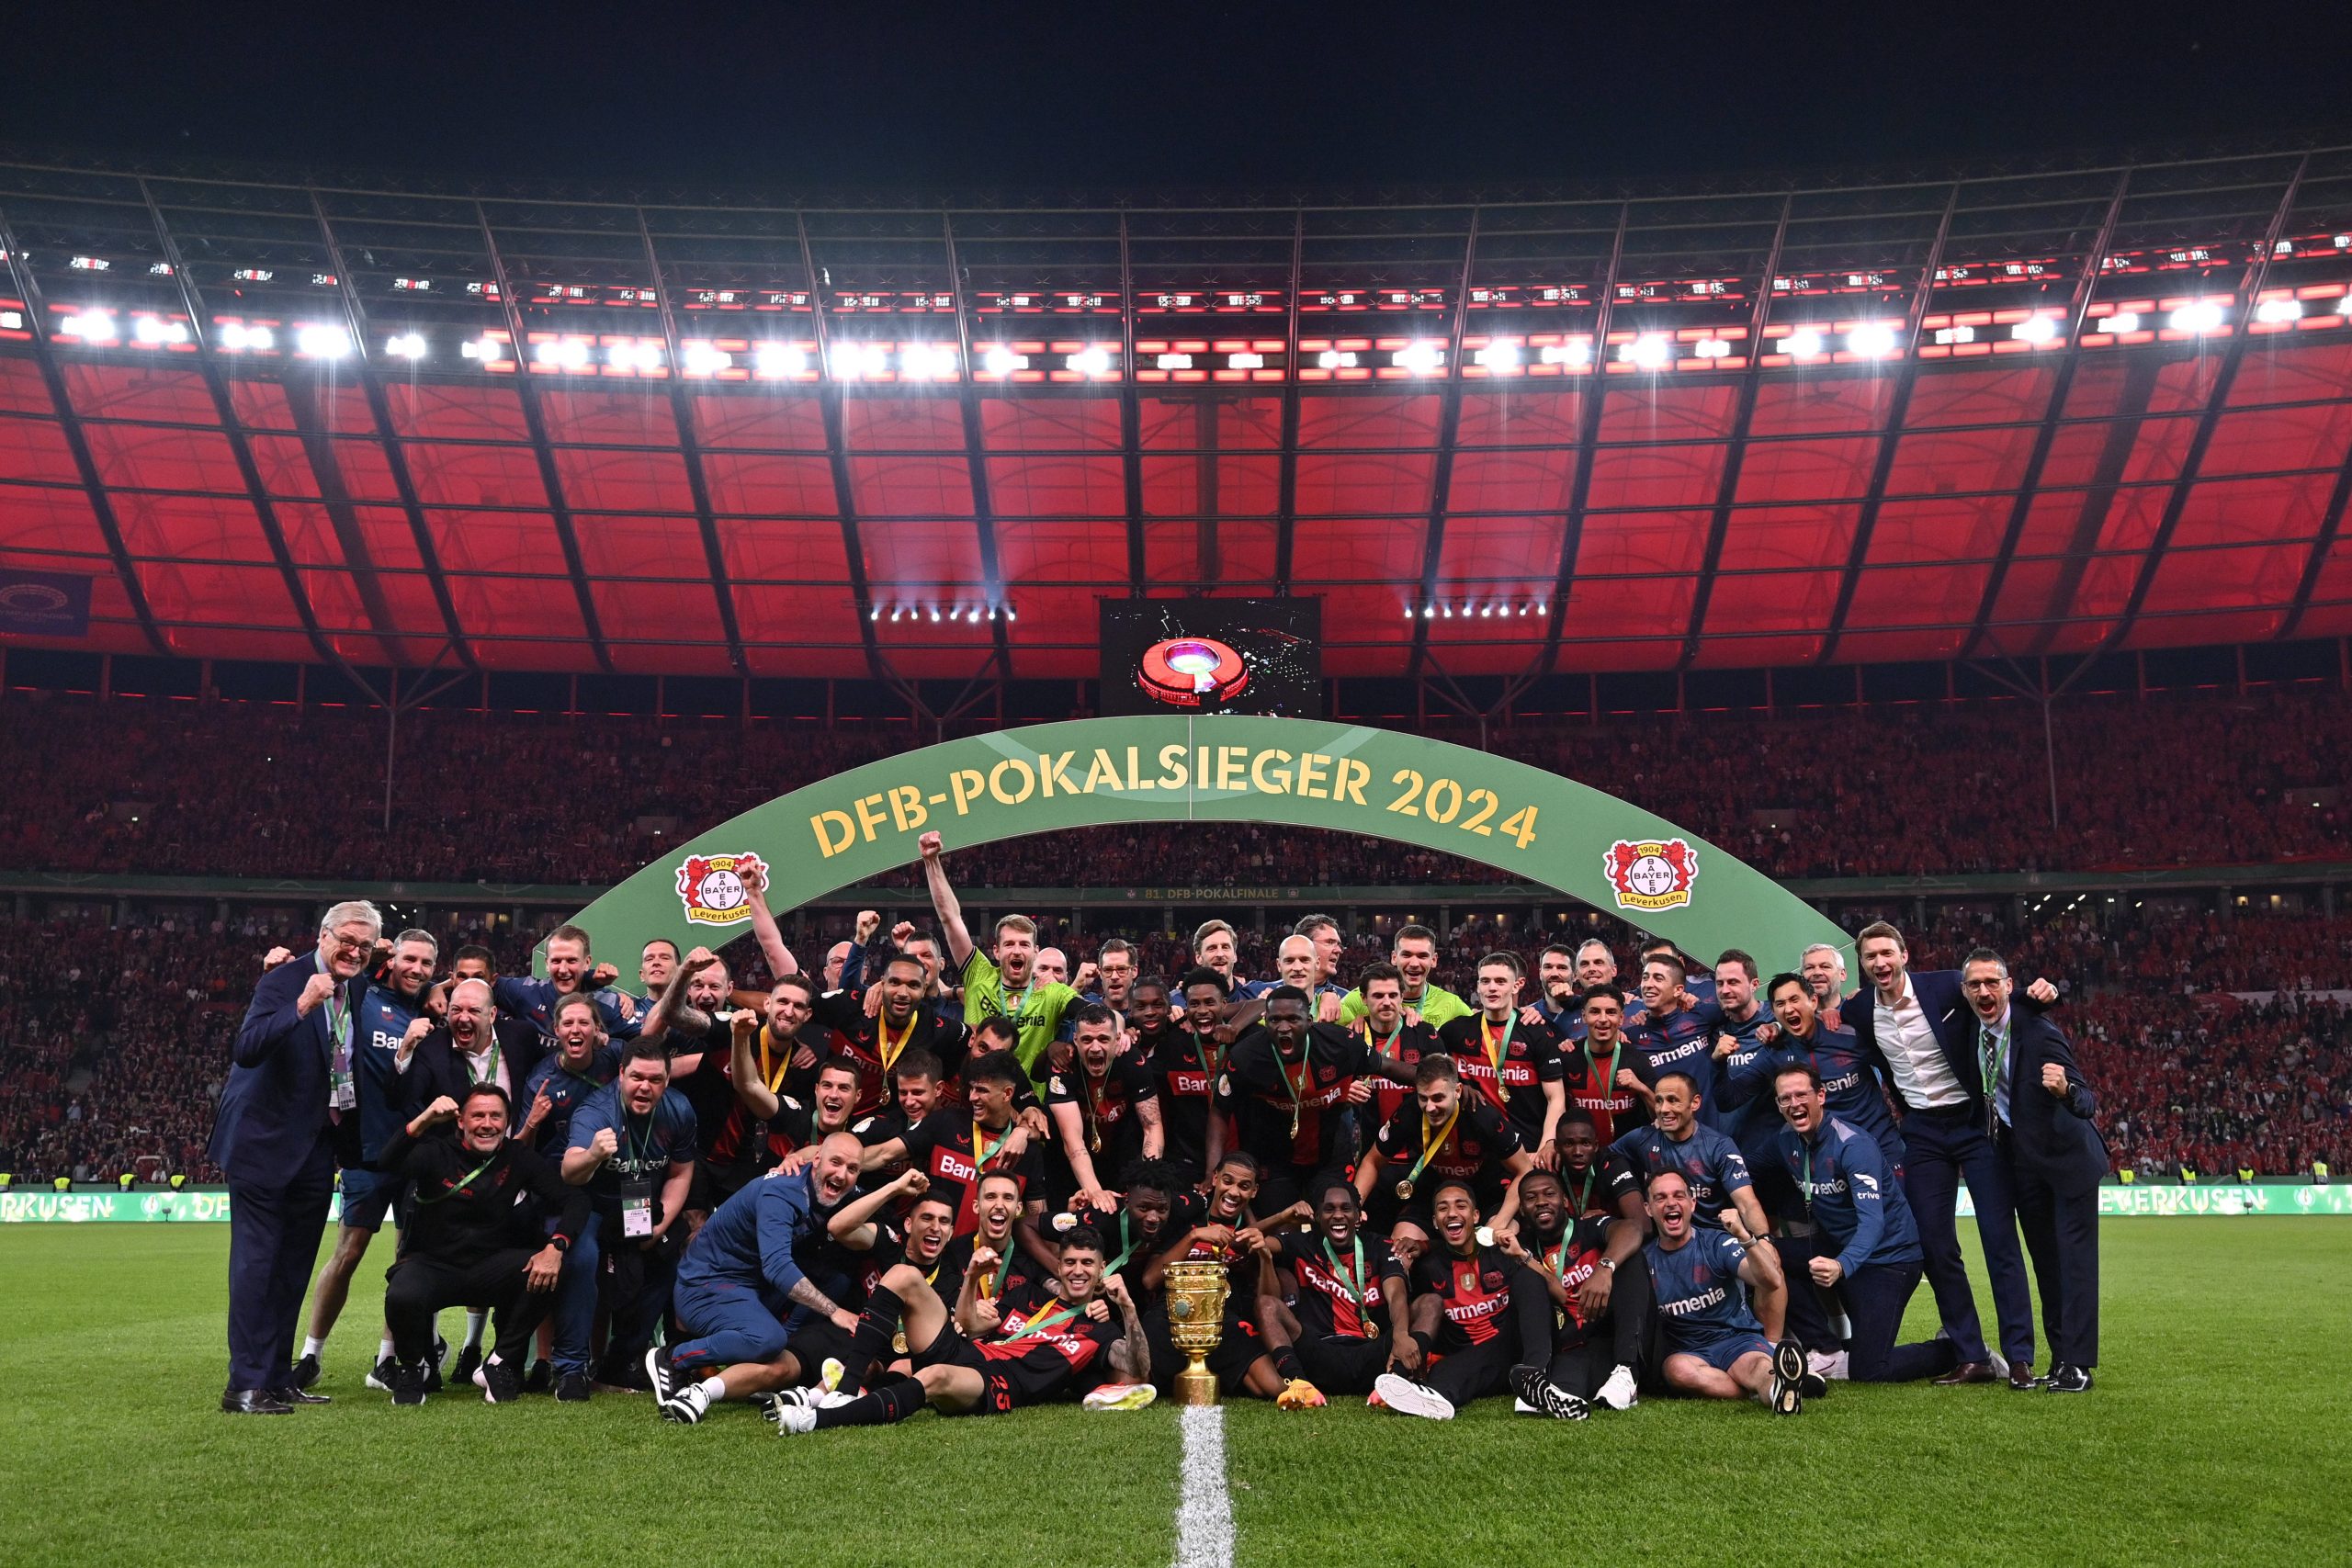 Cup final in Berlin: Leverkusen triumphs with double victory!